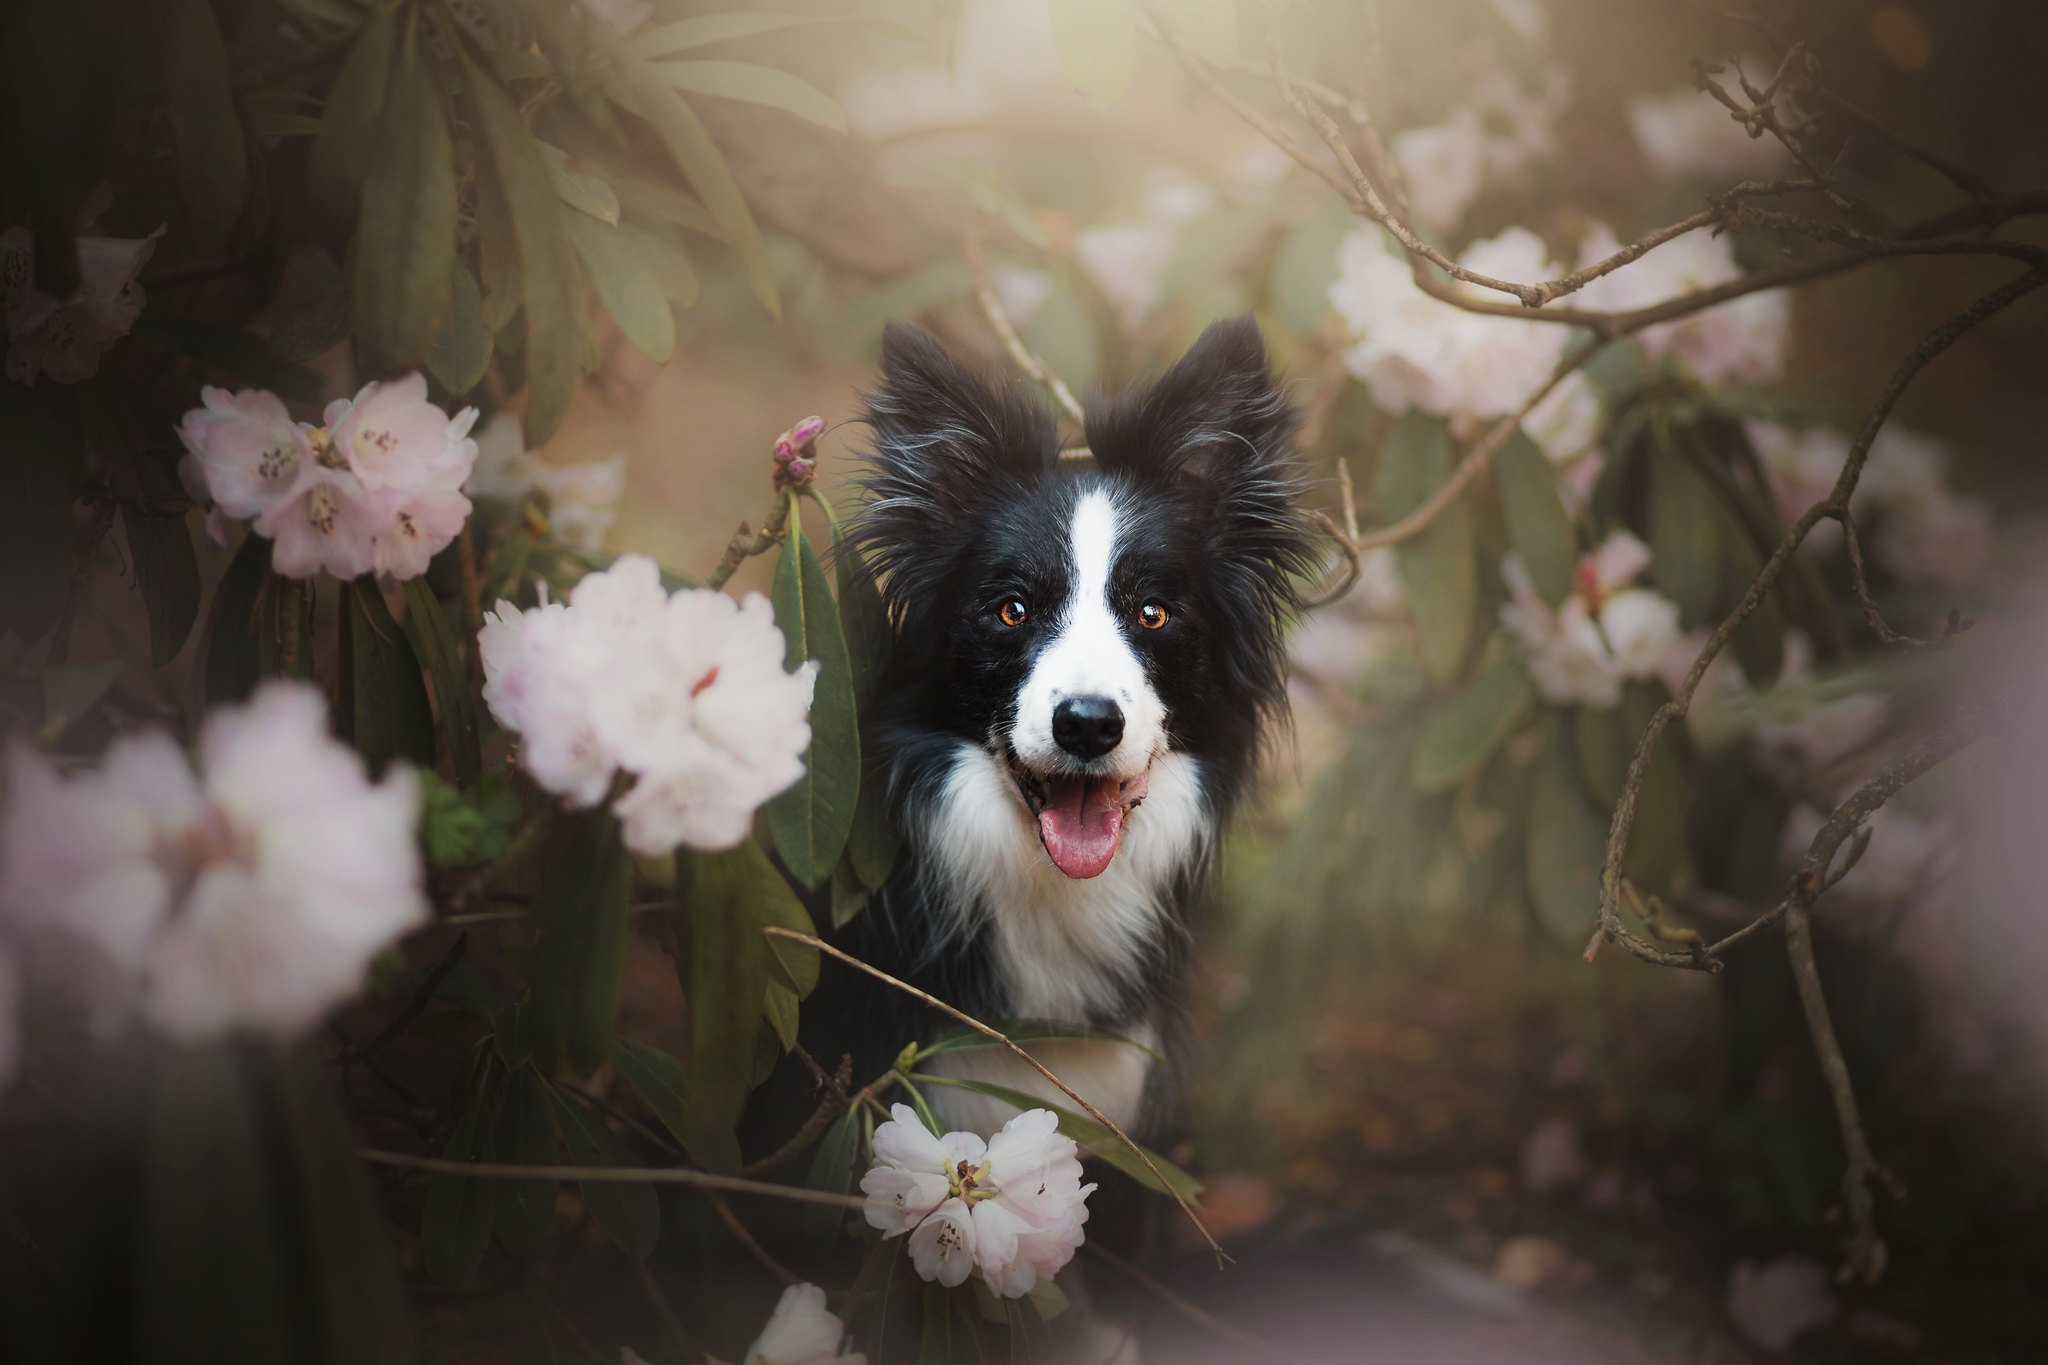 General 2048x1365 Border Collie dog animals mammals outdoors flowers pink flowers plants twigs leaves closeup